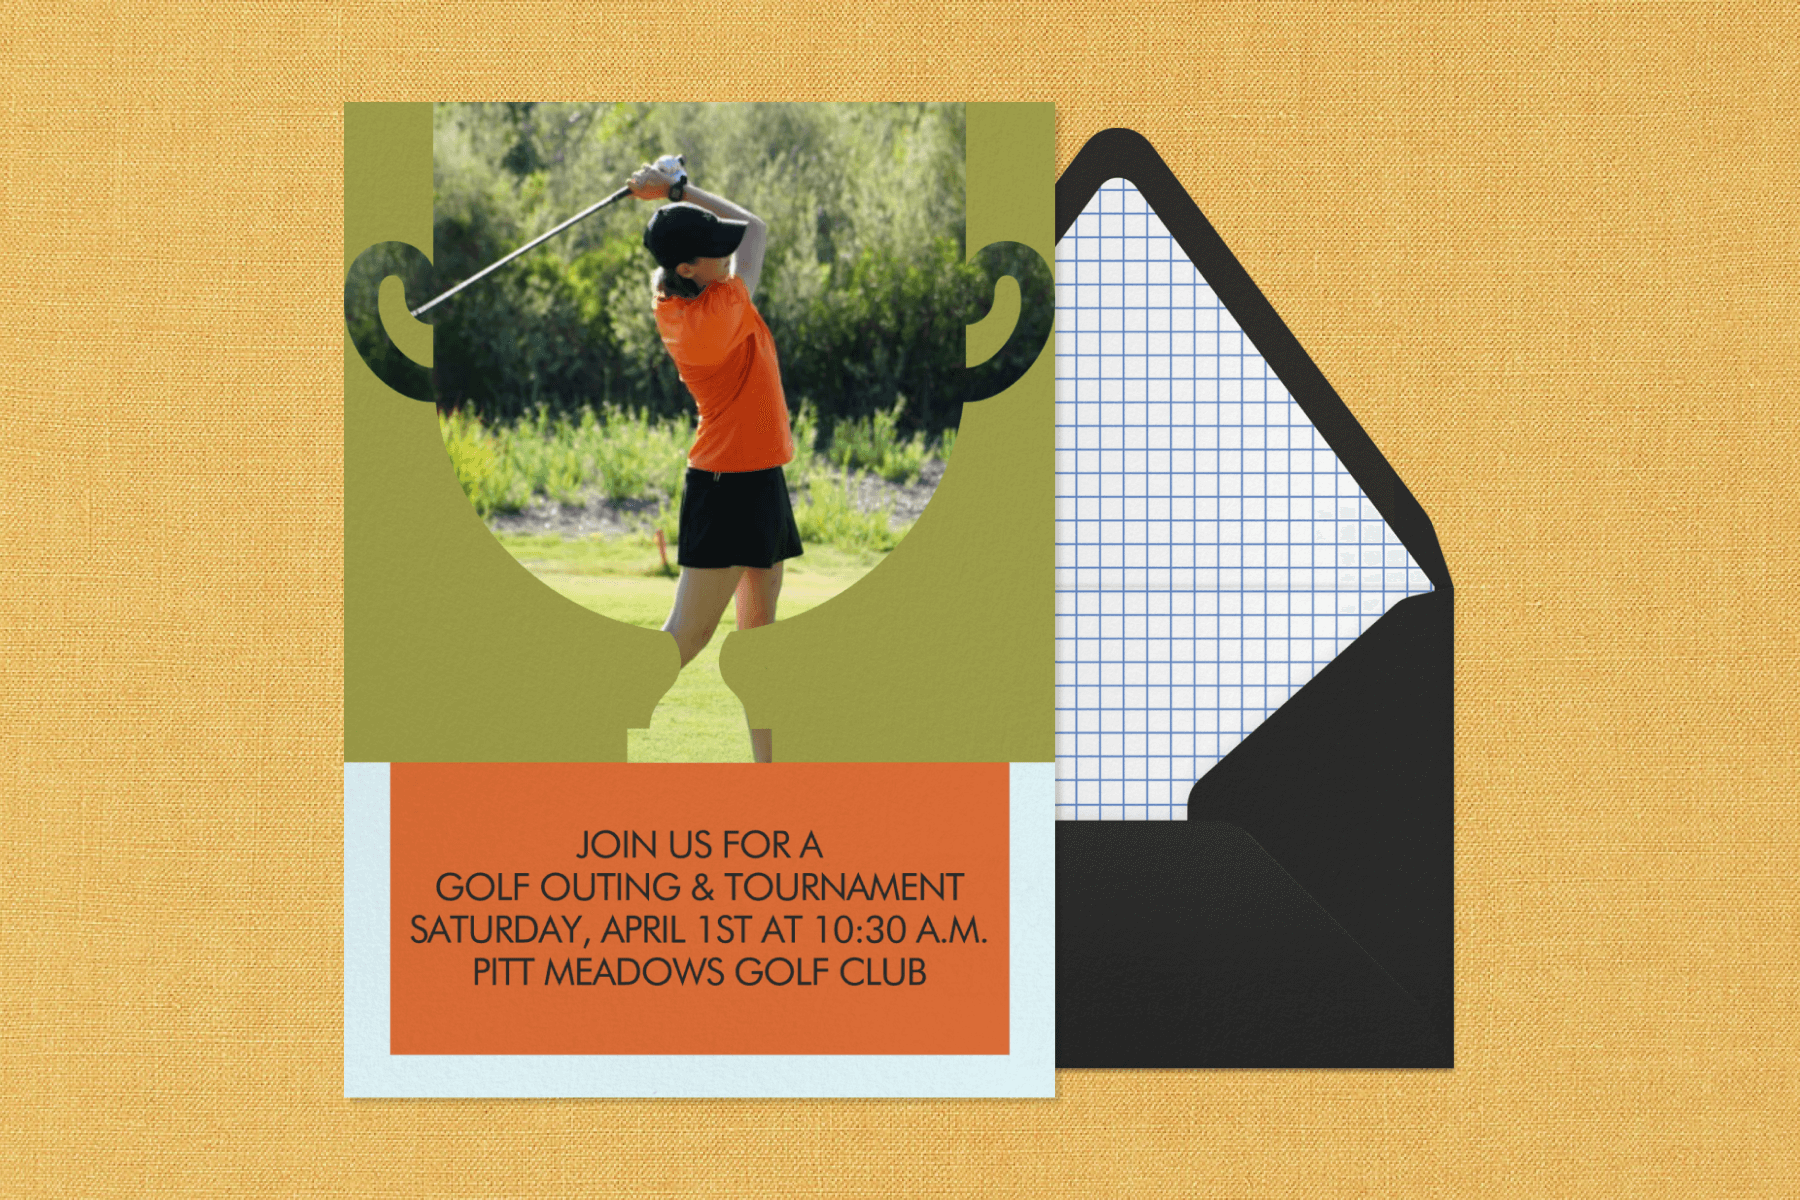 An invitation for a golf tournament with a person swinging a club in a green, trophy-shaped frame and an orange block of event details underneath beside a black envelope.